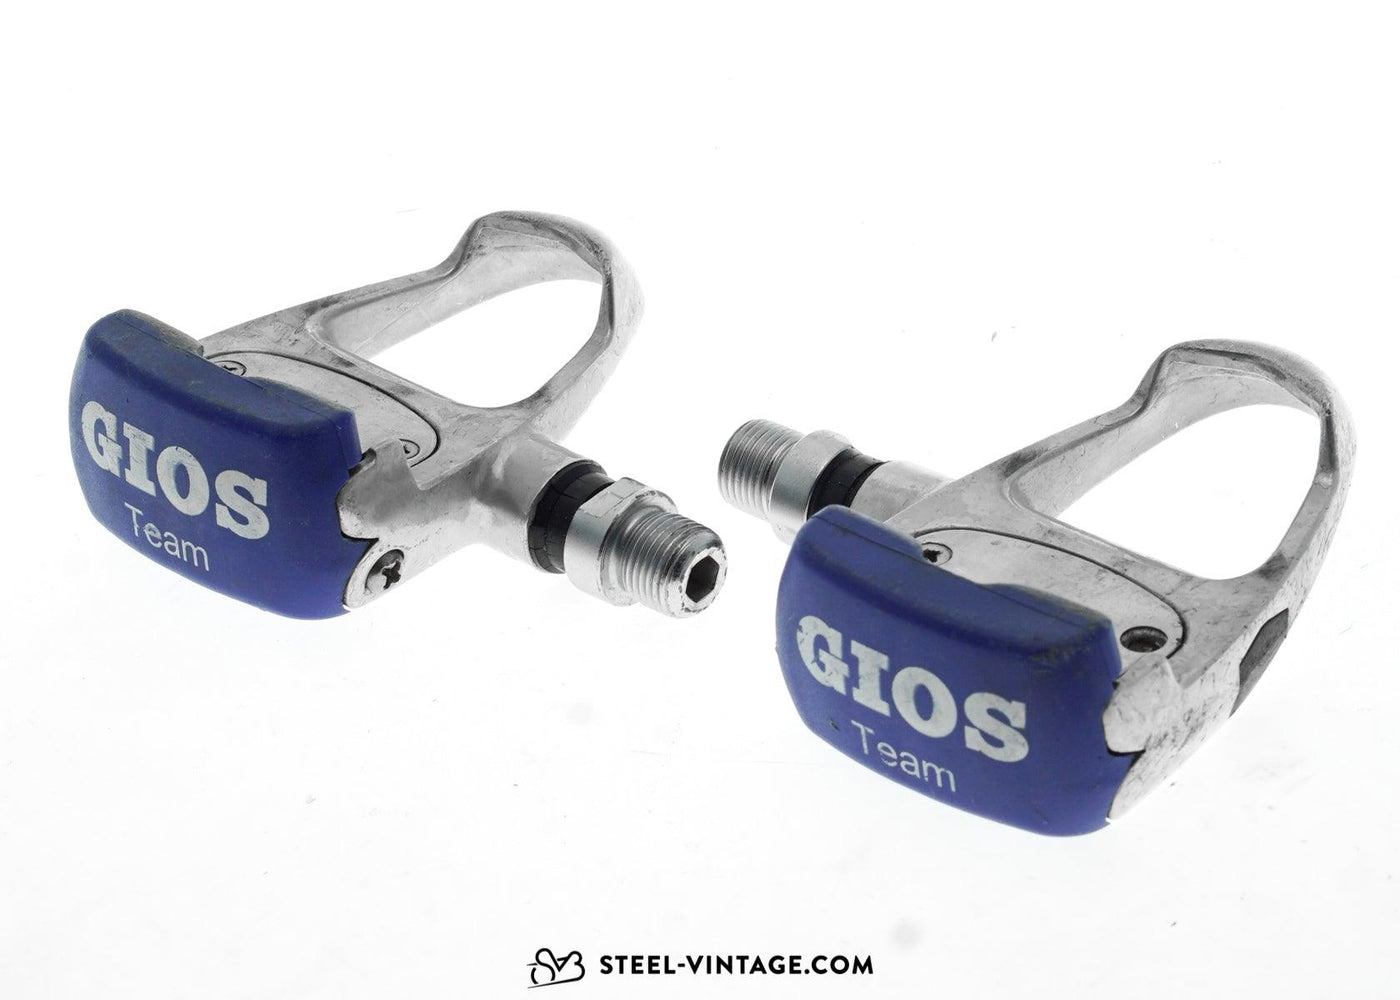 Gios Team Clipless Pedals - Steel Vintage Bikes